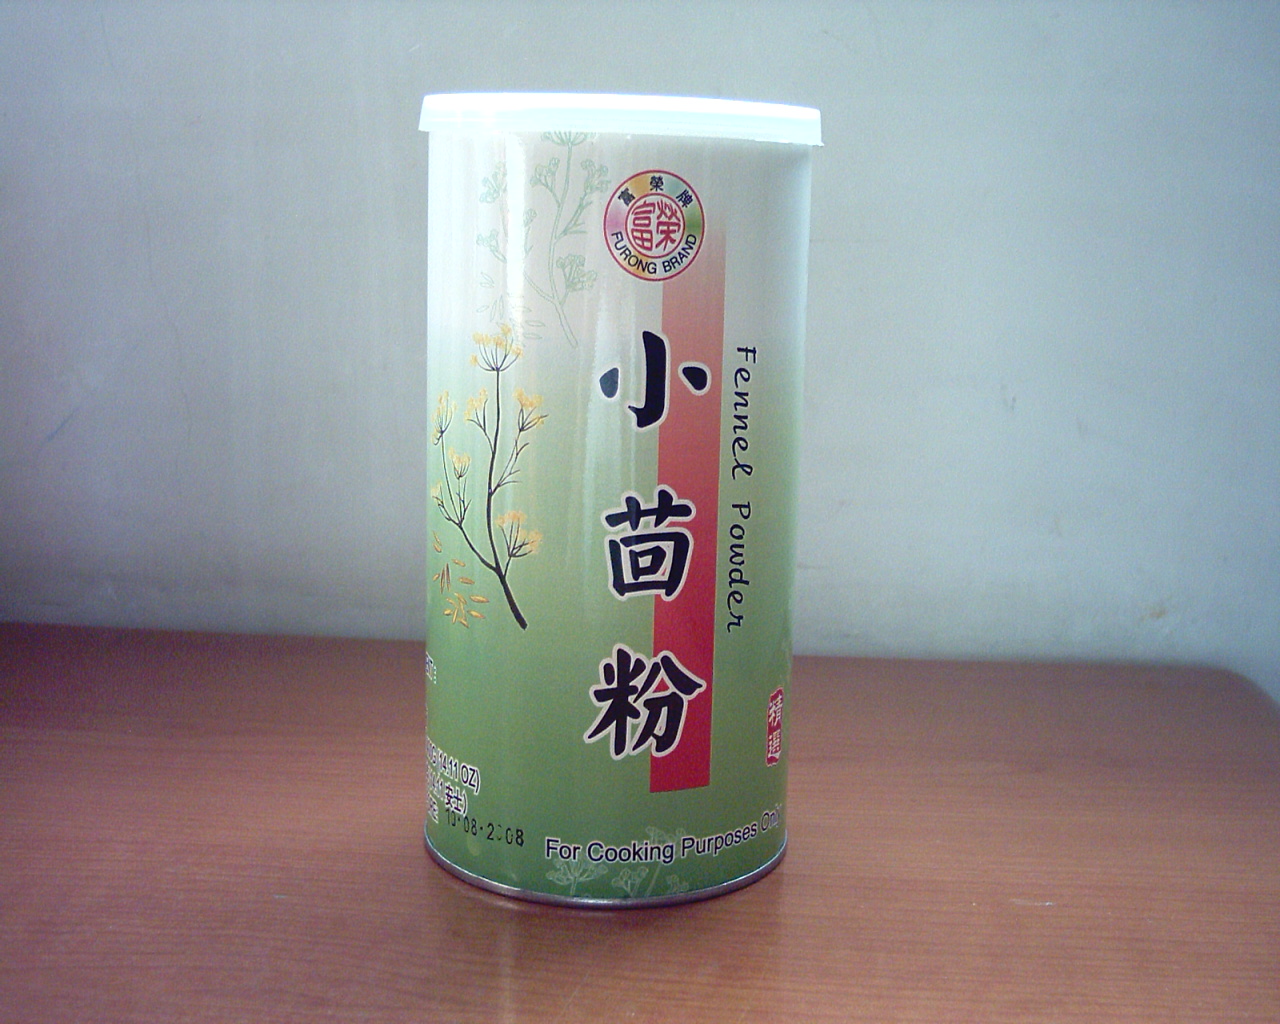 Canned fennel powder used in restaurants